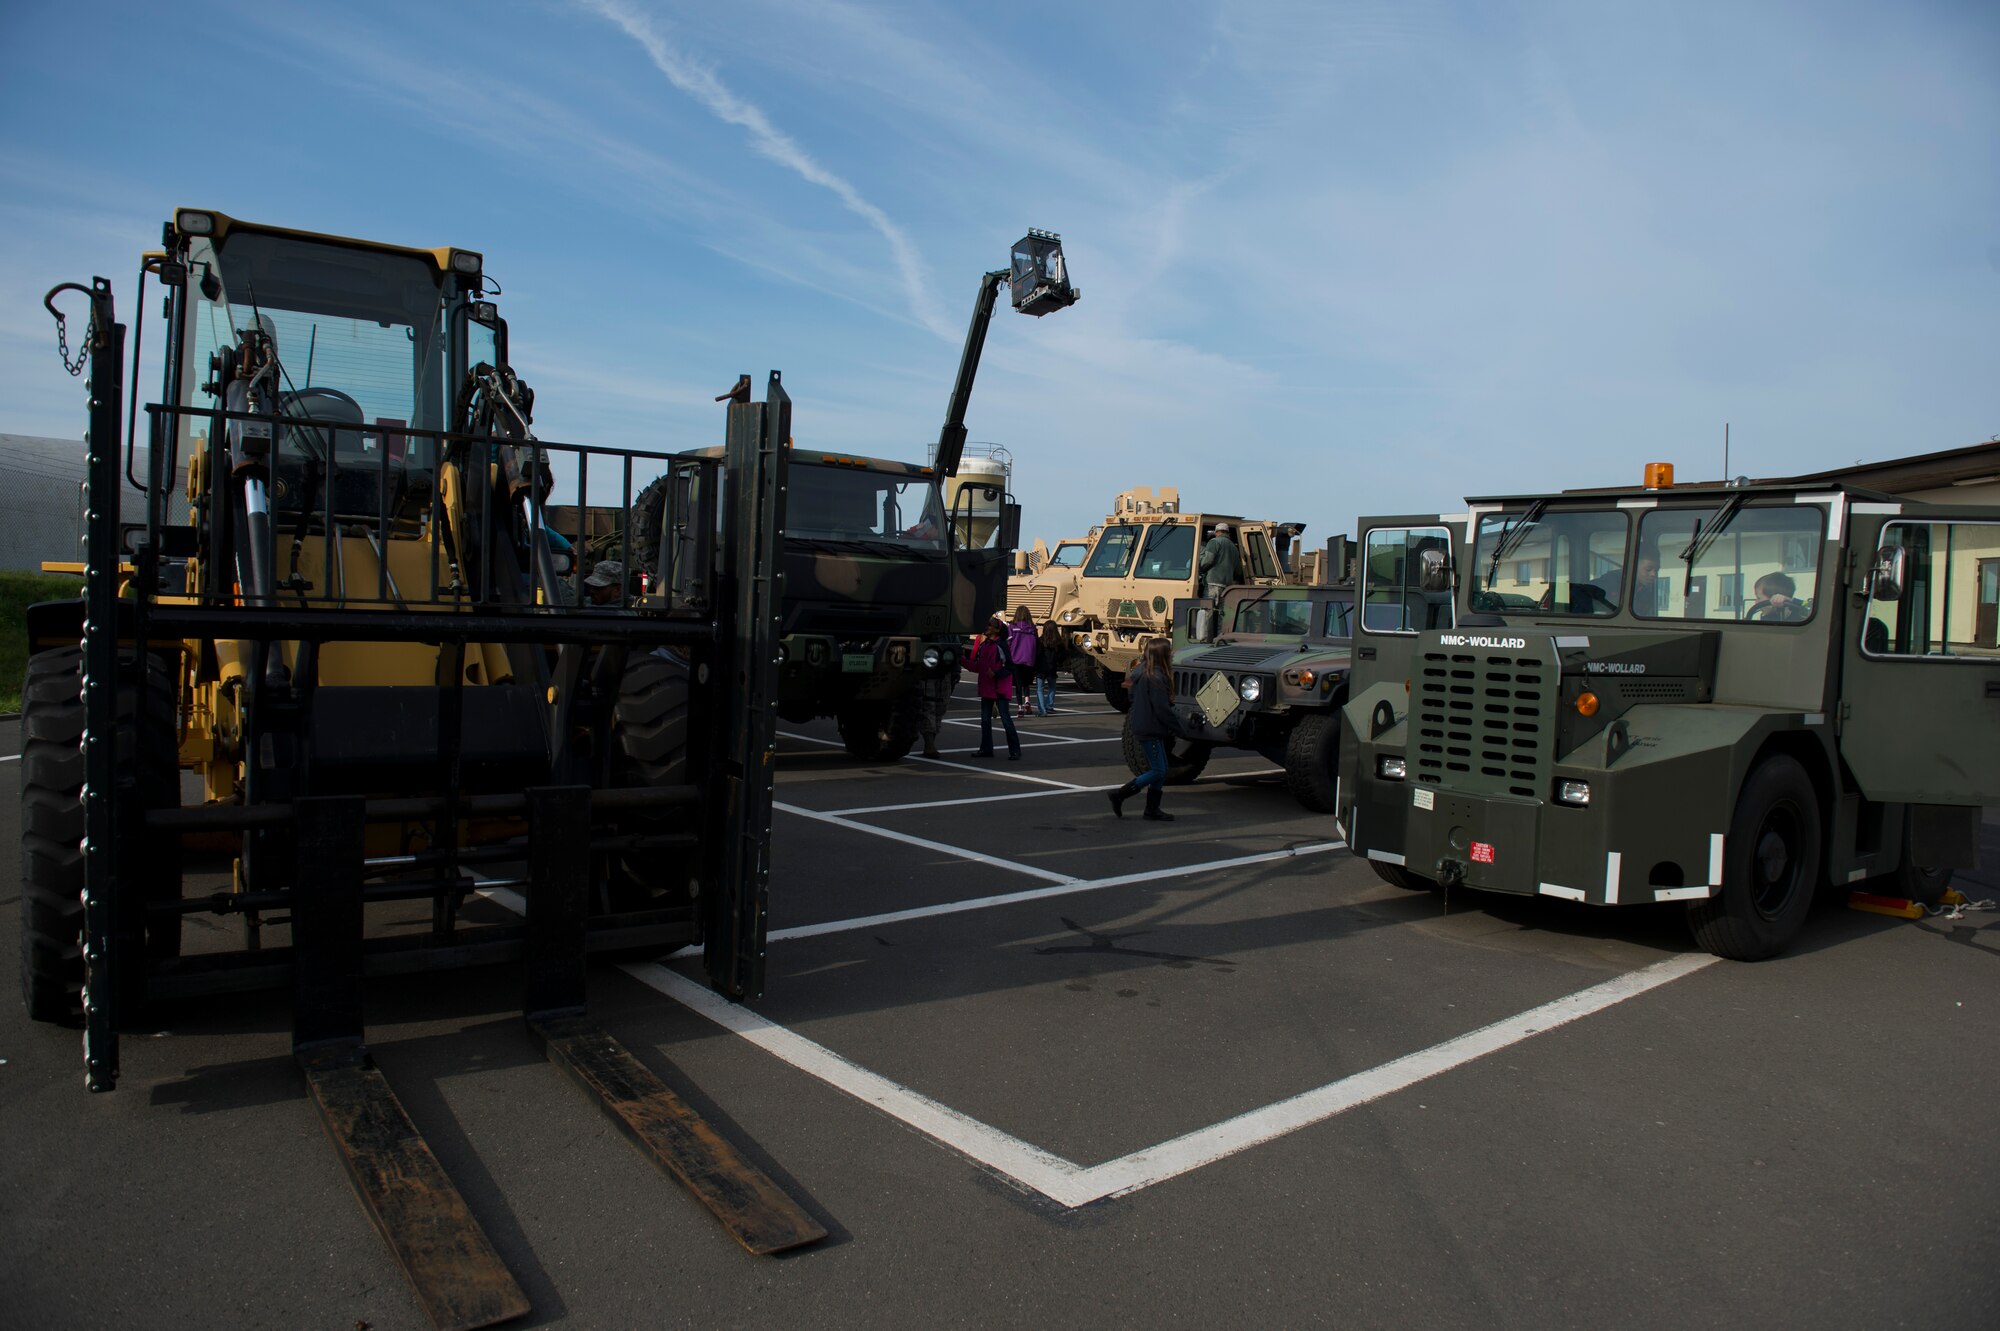 Students from Spangdahlem Elementary School check out military vehicles during Kids’ Deployment Day at Spangdahlem Air Base, Germany, April 29, 2015. Children interacted with multiple vehicles including security forces patrol cars and a fire truck as a part of their simulated deployment to Rio De Janeiro. (U.S. Air Force photo by Airman 1st Class Luke Kitterman/Released) 